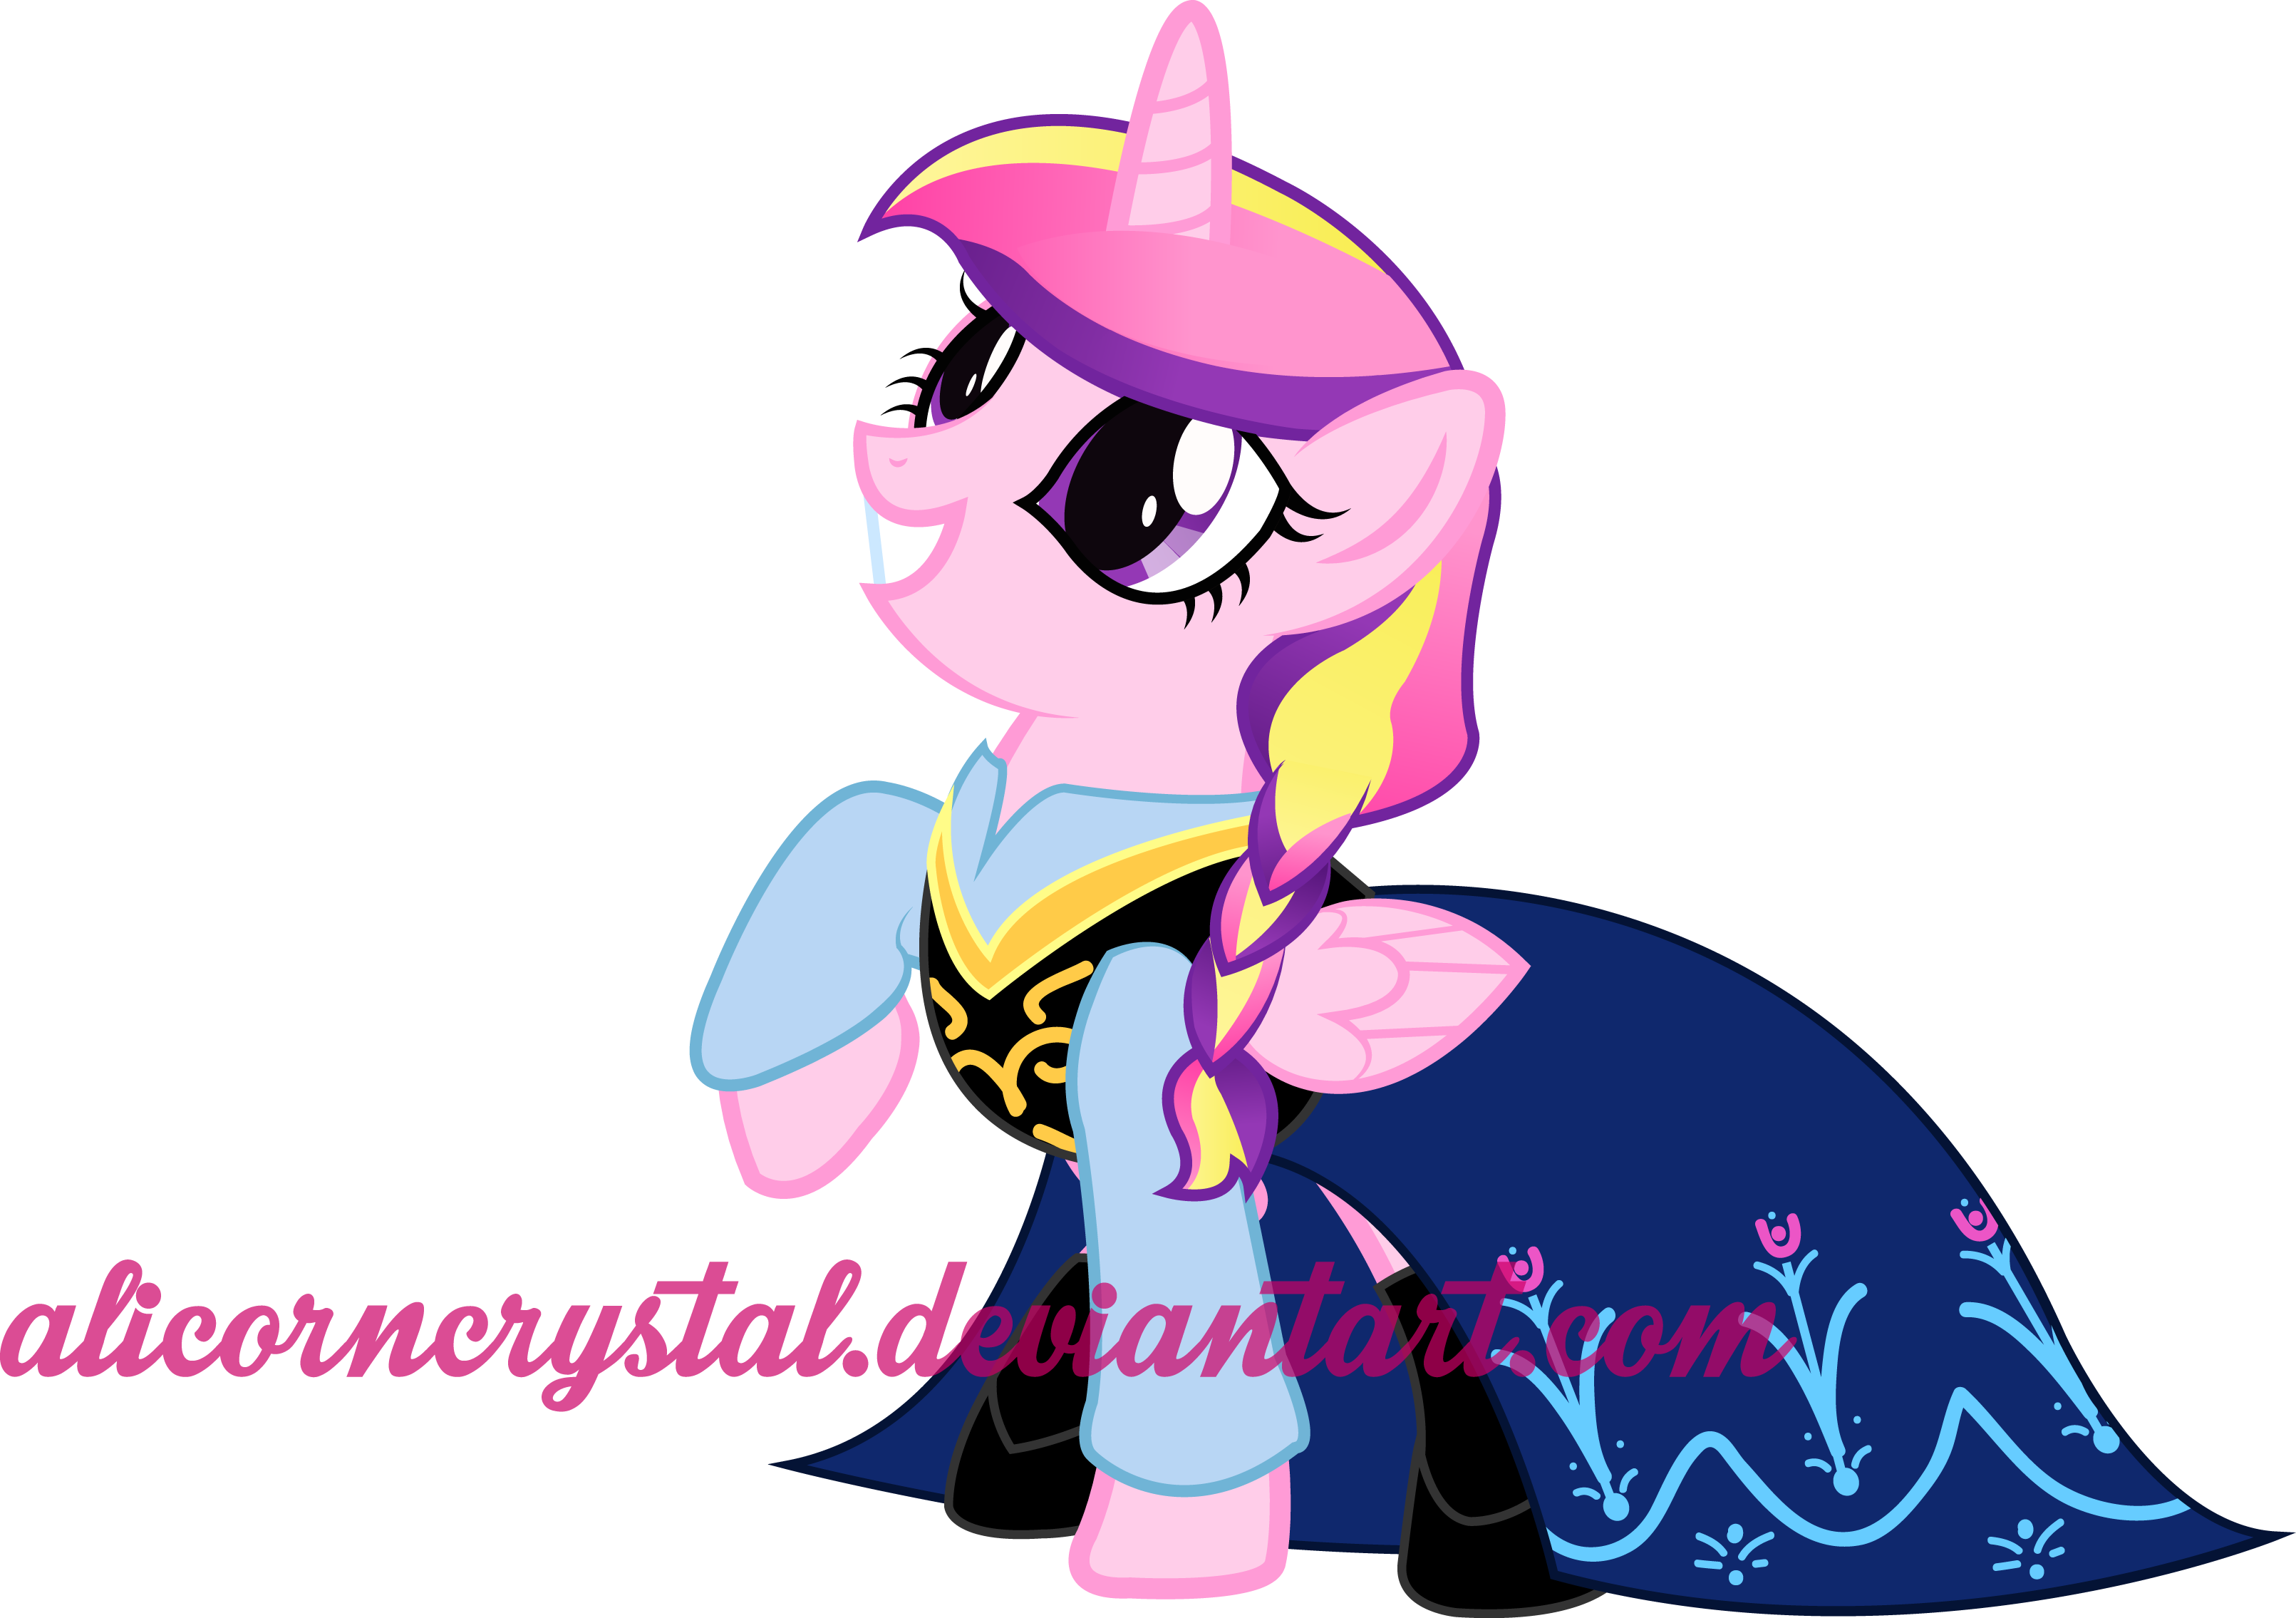 1468144__safe_artist-colon-alinadreams00_princess+cadance_anna_clothes_cosplay_costume_crossover_disney_frozen+%28movie%29_simple+background_solo_trans.png